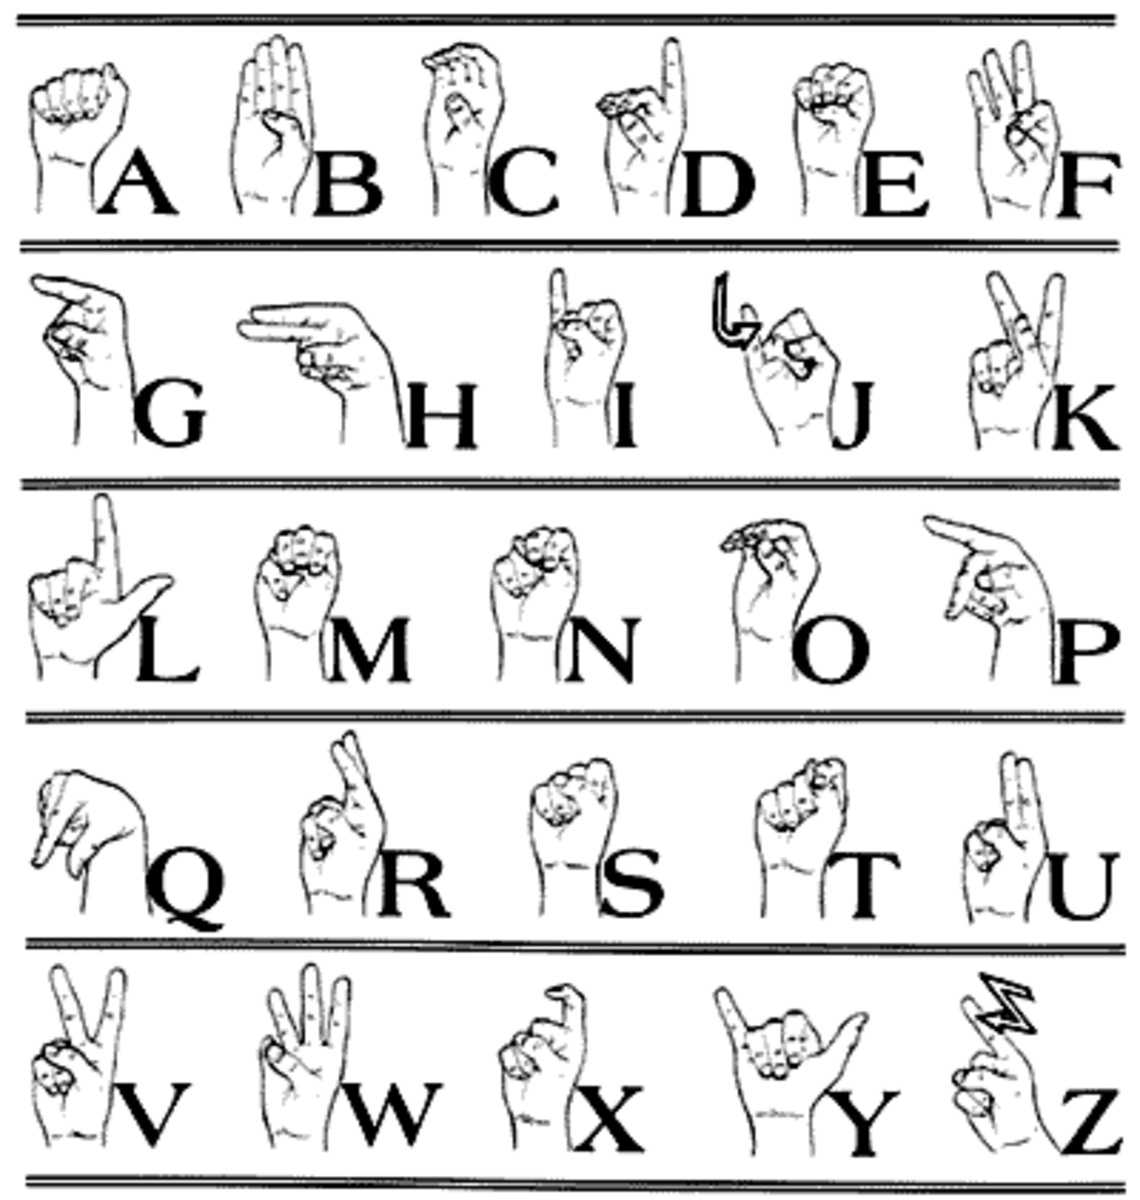 Online Sites to Learn American Sign Language (ASL)